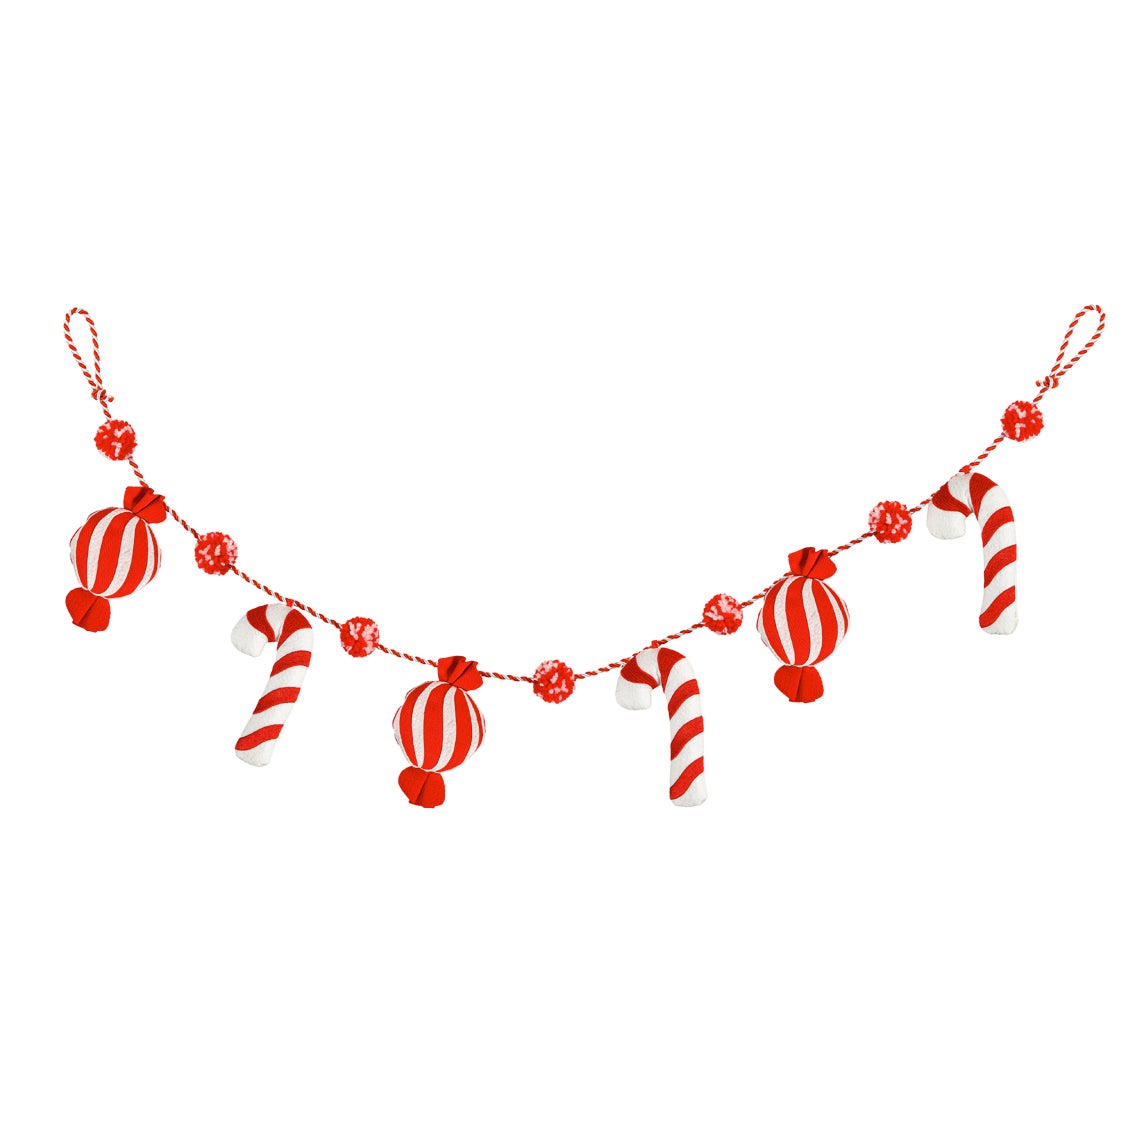 42" Fabric Candy Cane and Peppermint Garland